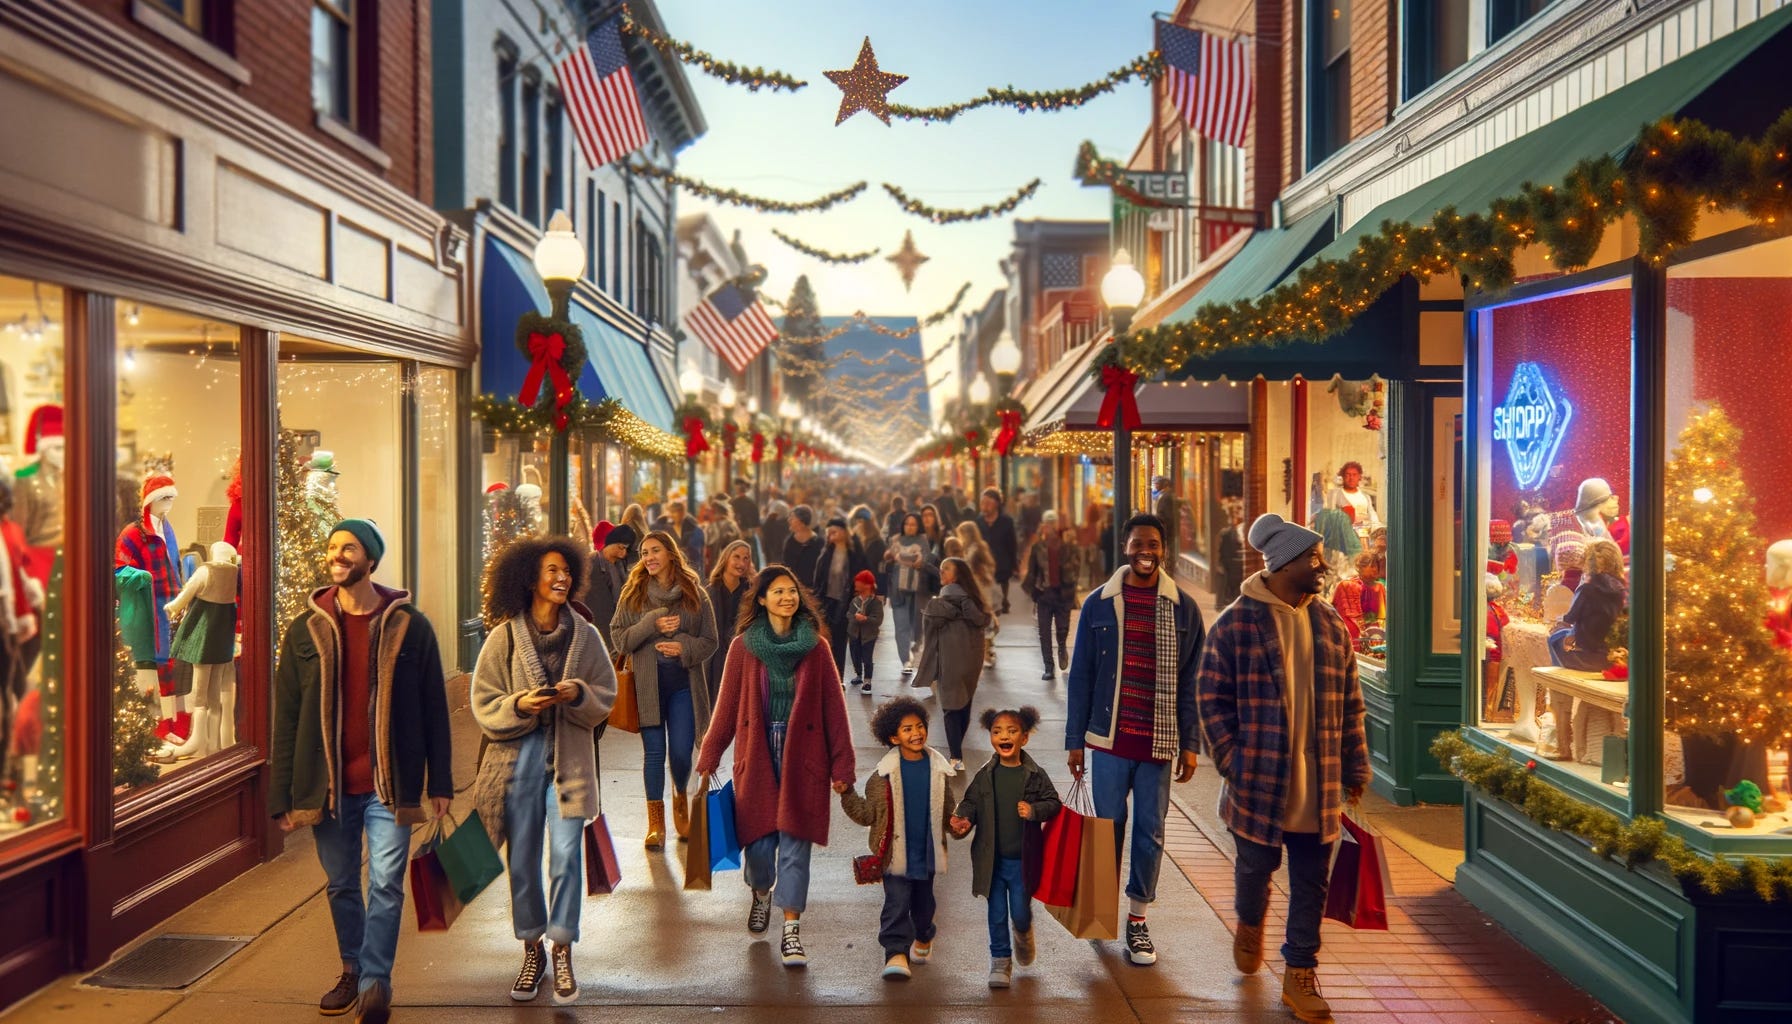 image depicting a vibrant scene of people shopping on a main street in a typical American town during the holiday season. The atmosphere is lively and festive, capturing the spirit of community and holiday cheer.